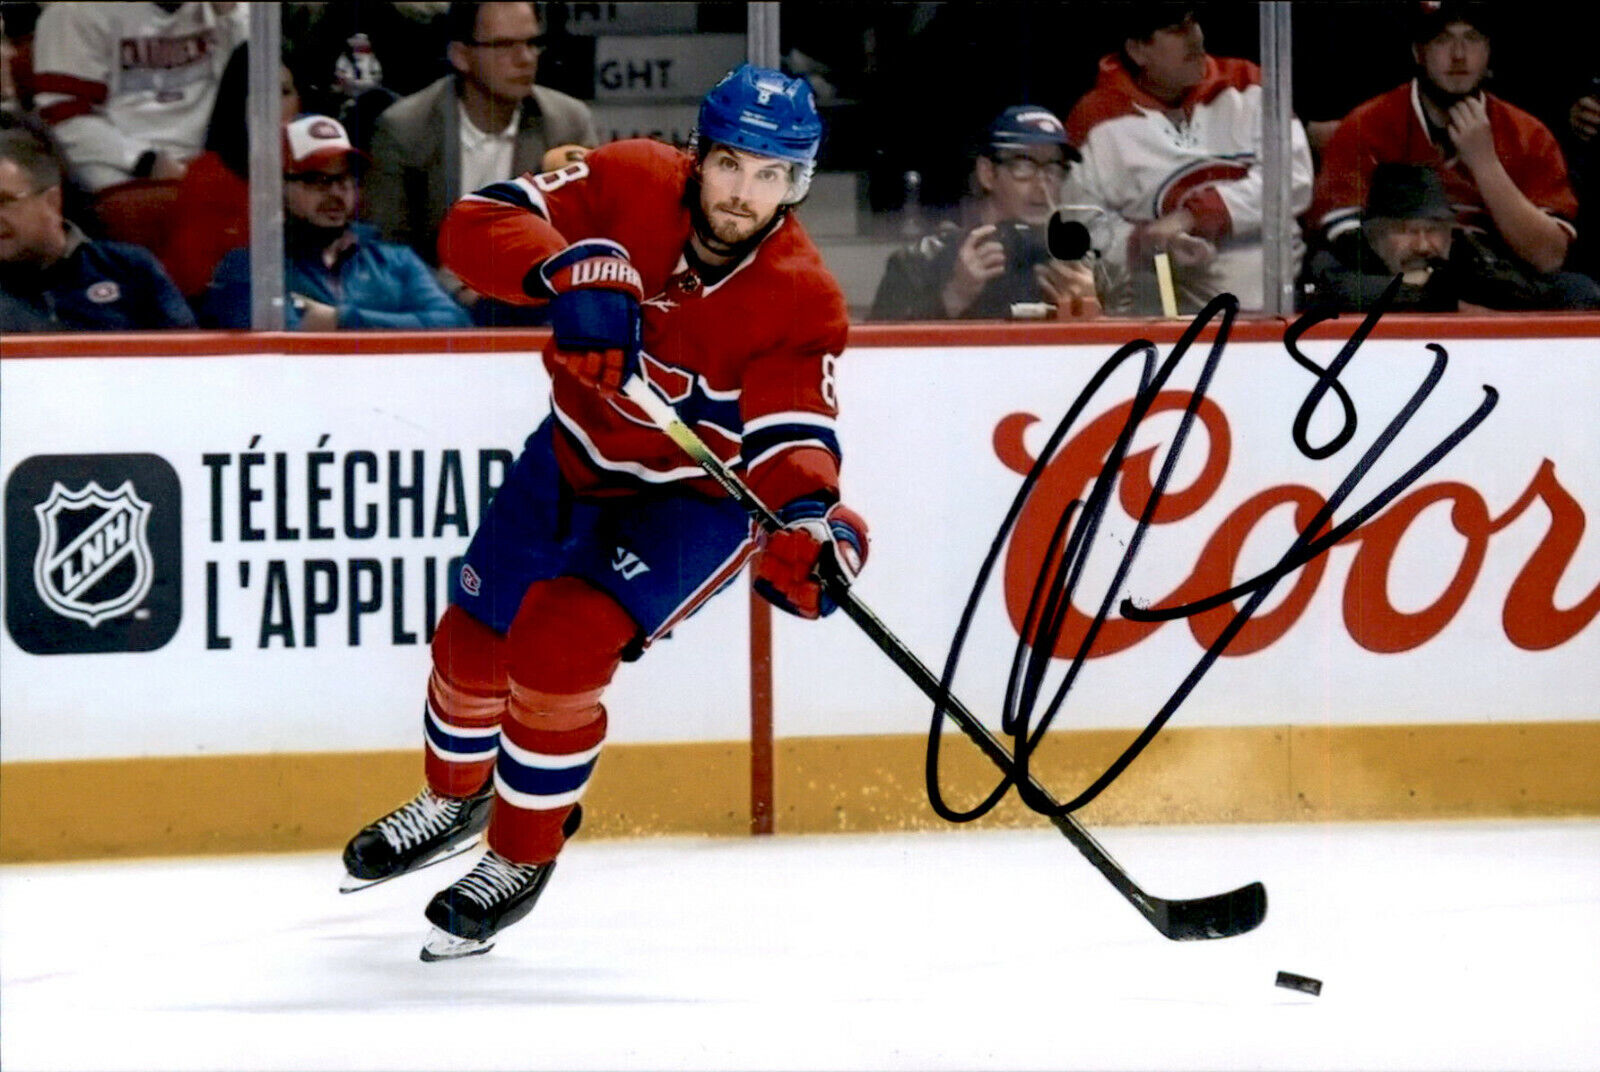 Ben Chiarot SIGNED autographed 4x6 Photo Poster painting MONTREAL CANADIENS #5